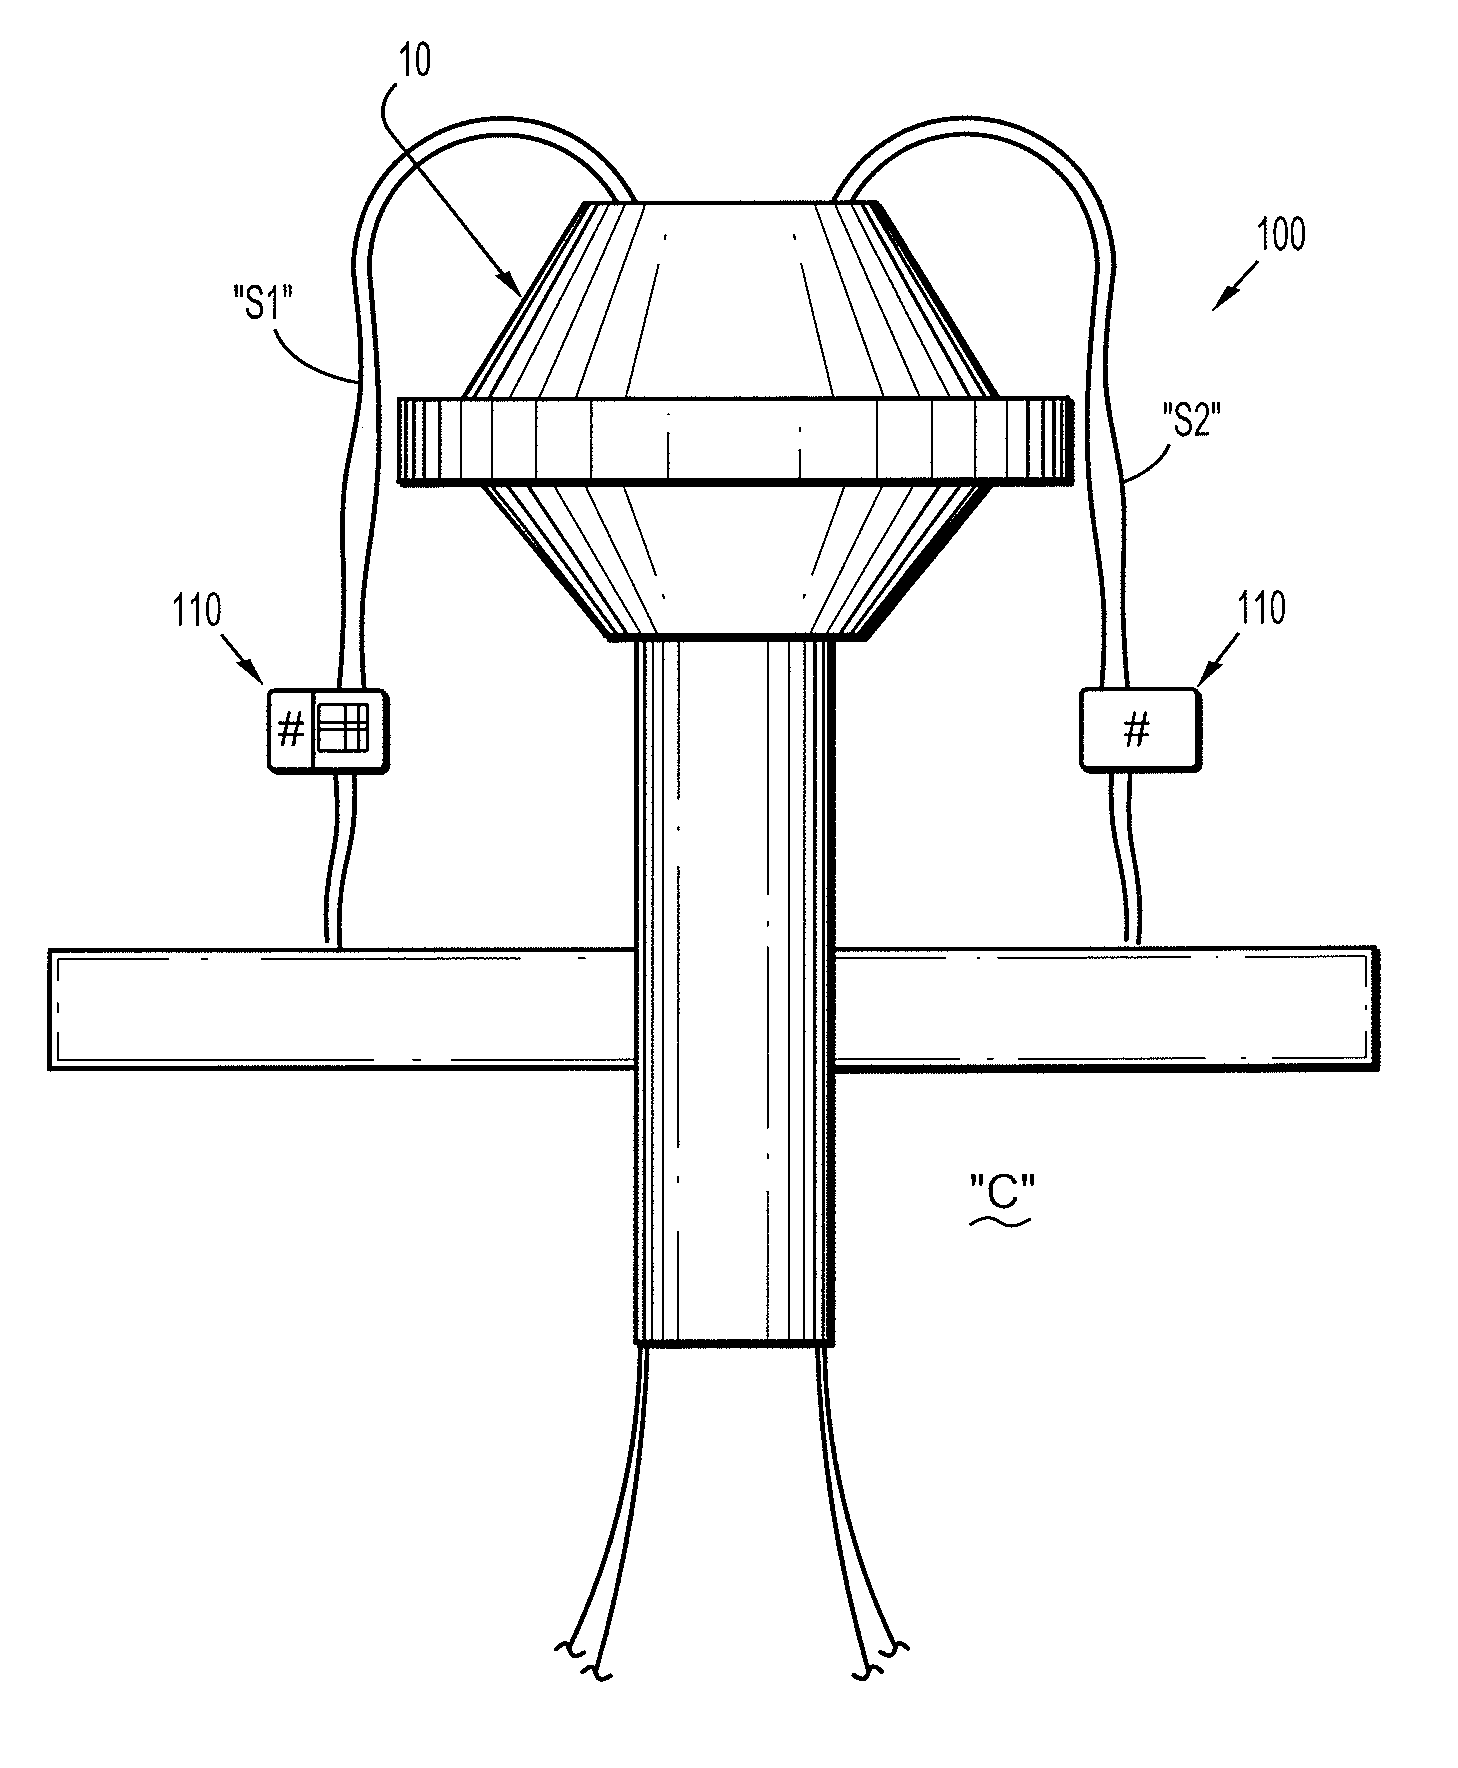 Suture management system for surgical portal apparatus including numbered clips